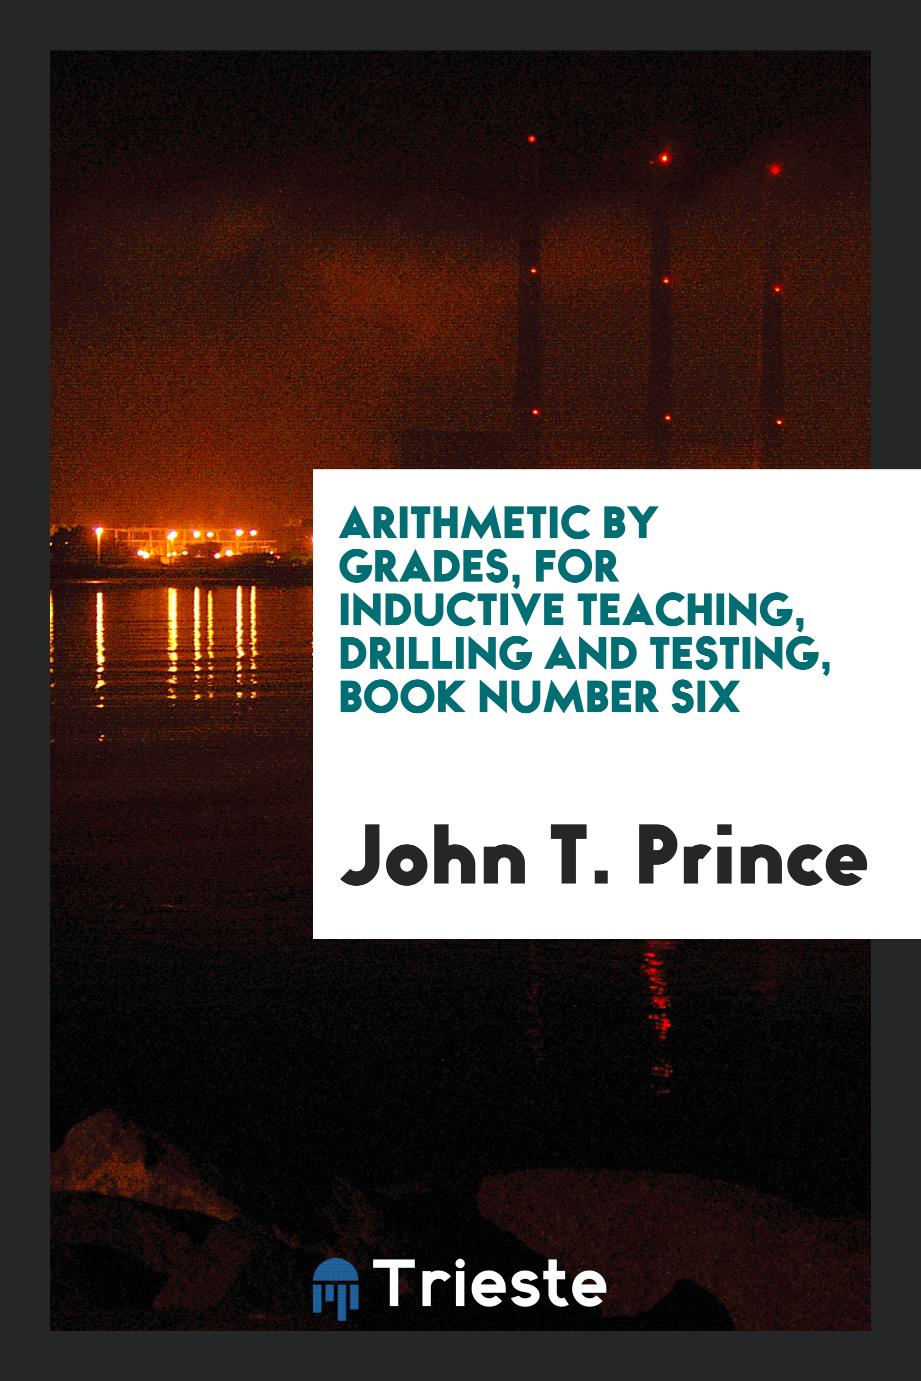 Arithmetic by Grades, for Inductive Teaching, Drilling and Testing, Book Number Six